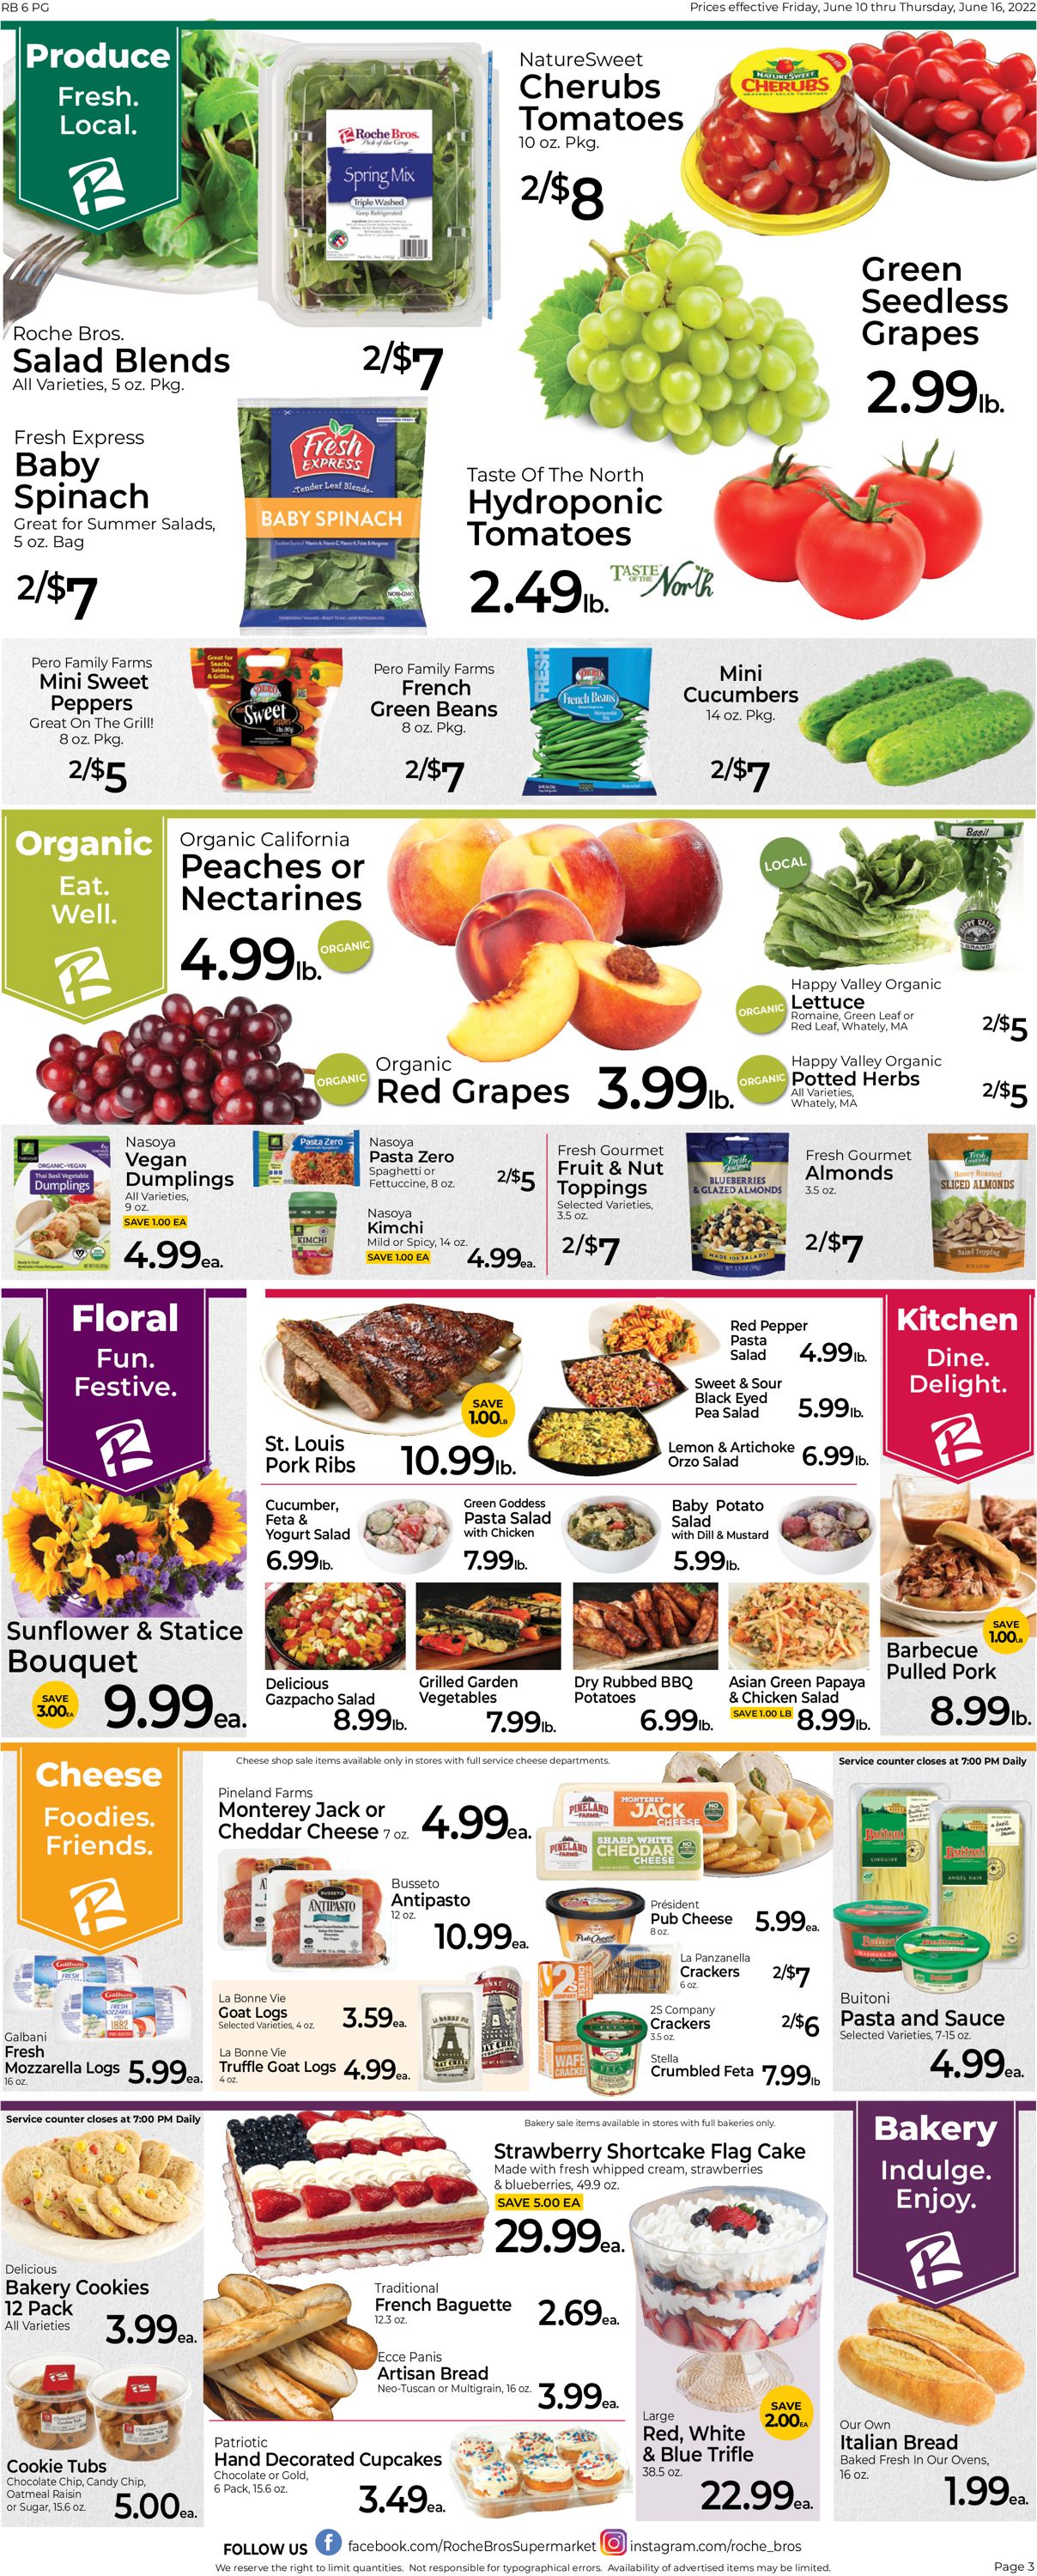 Catalogue Roche Bros. Supermarkets from 06/10/2022